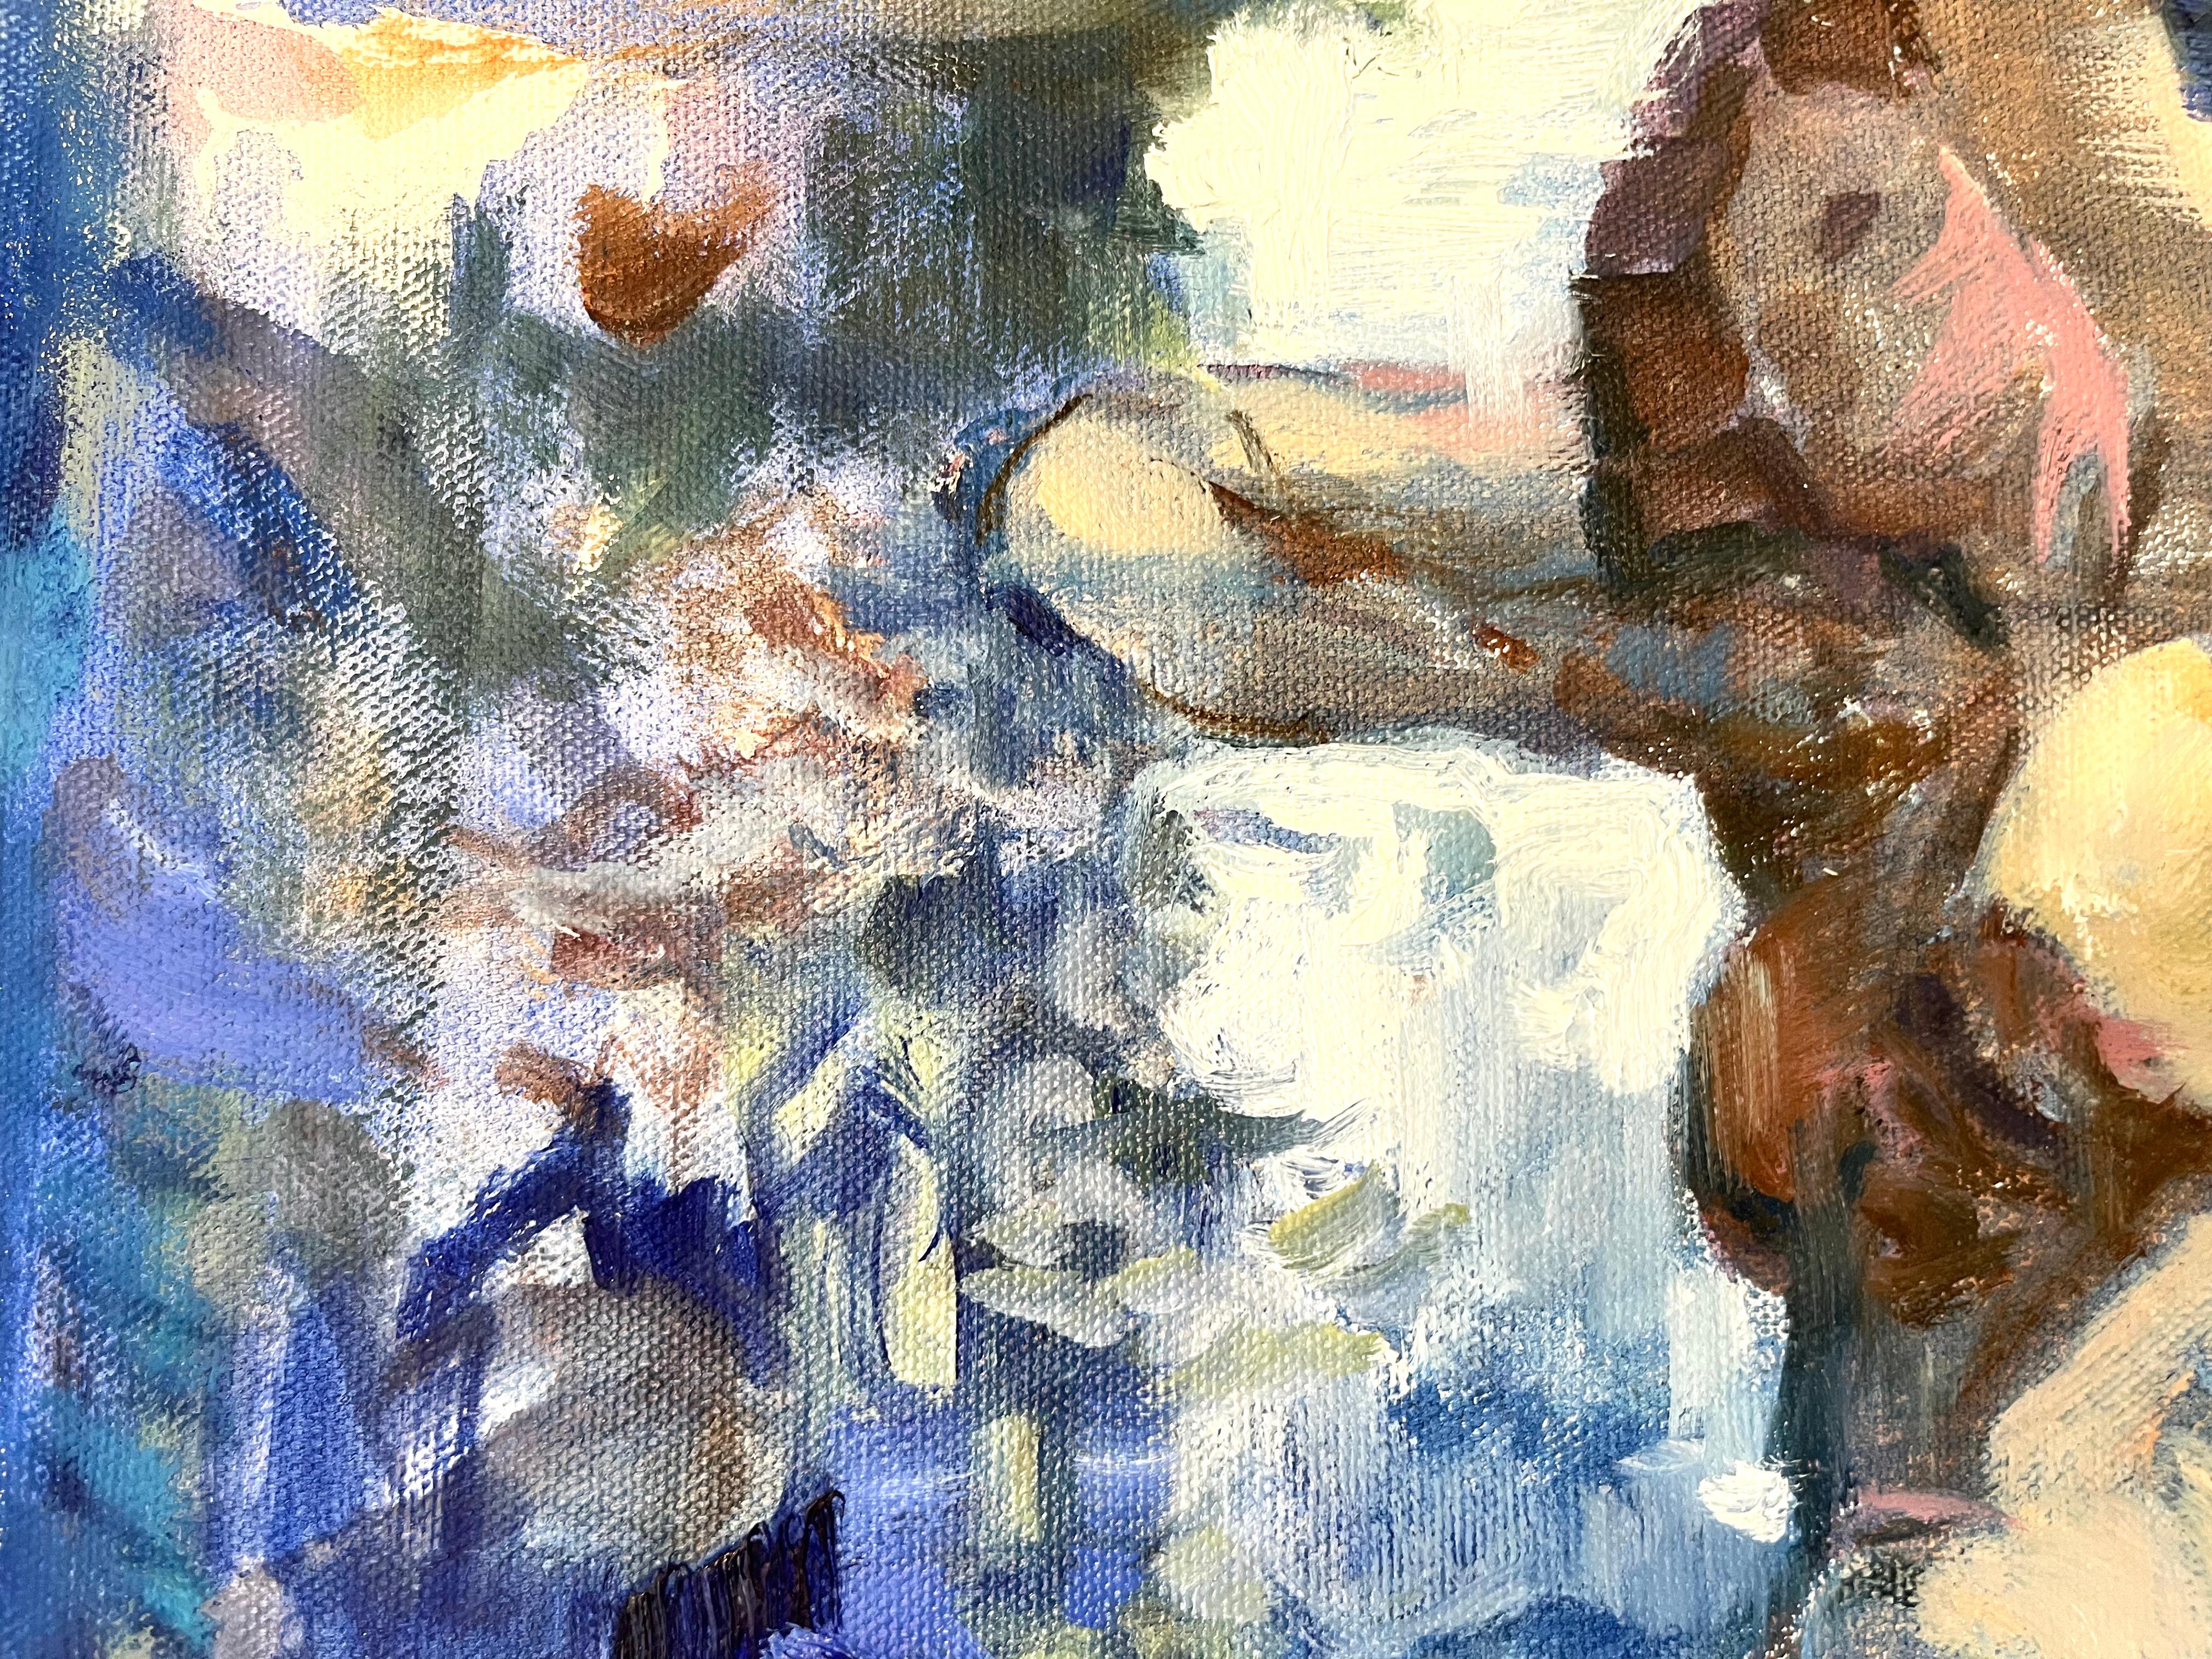 The Bather
Description: Oil on canvas, blue, figurative, nude, abstract, gestural, modern

In this vibrant oil painting Jessica Benjamin captures a private moment depicted throughout art history. Through expressive brushwork, and use of color, this